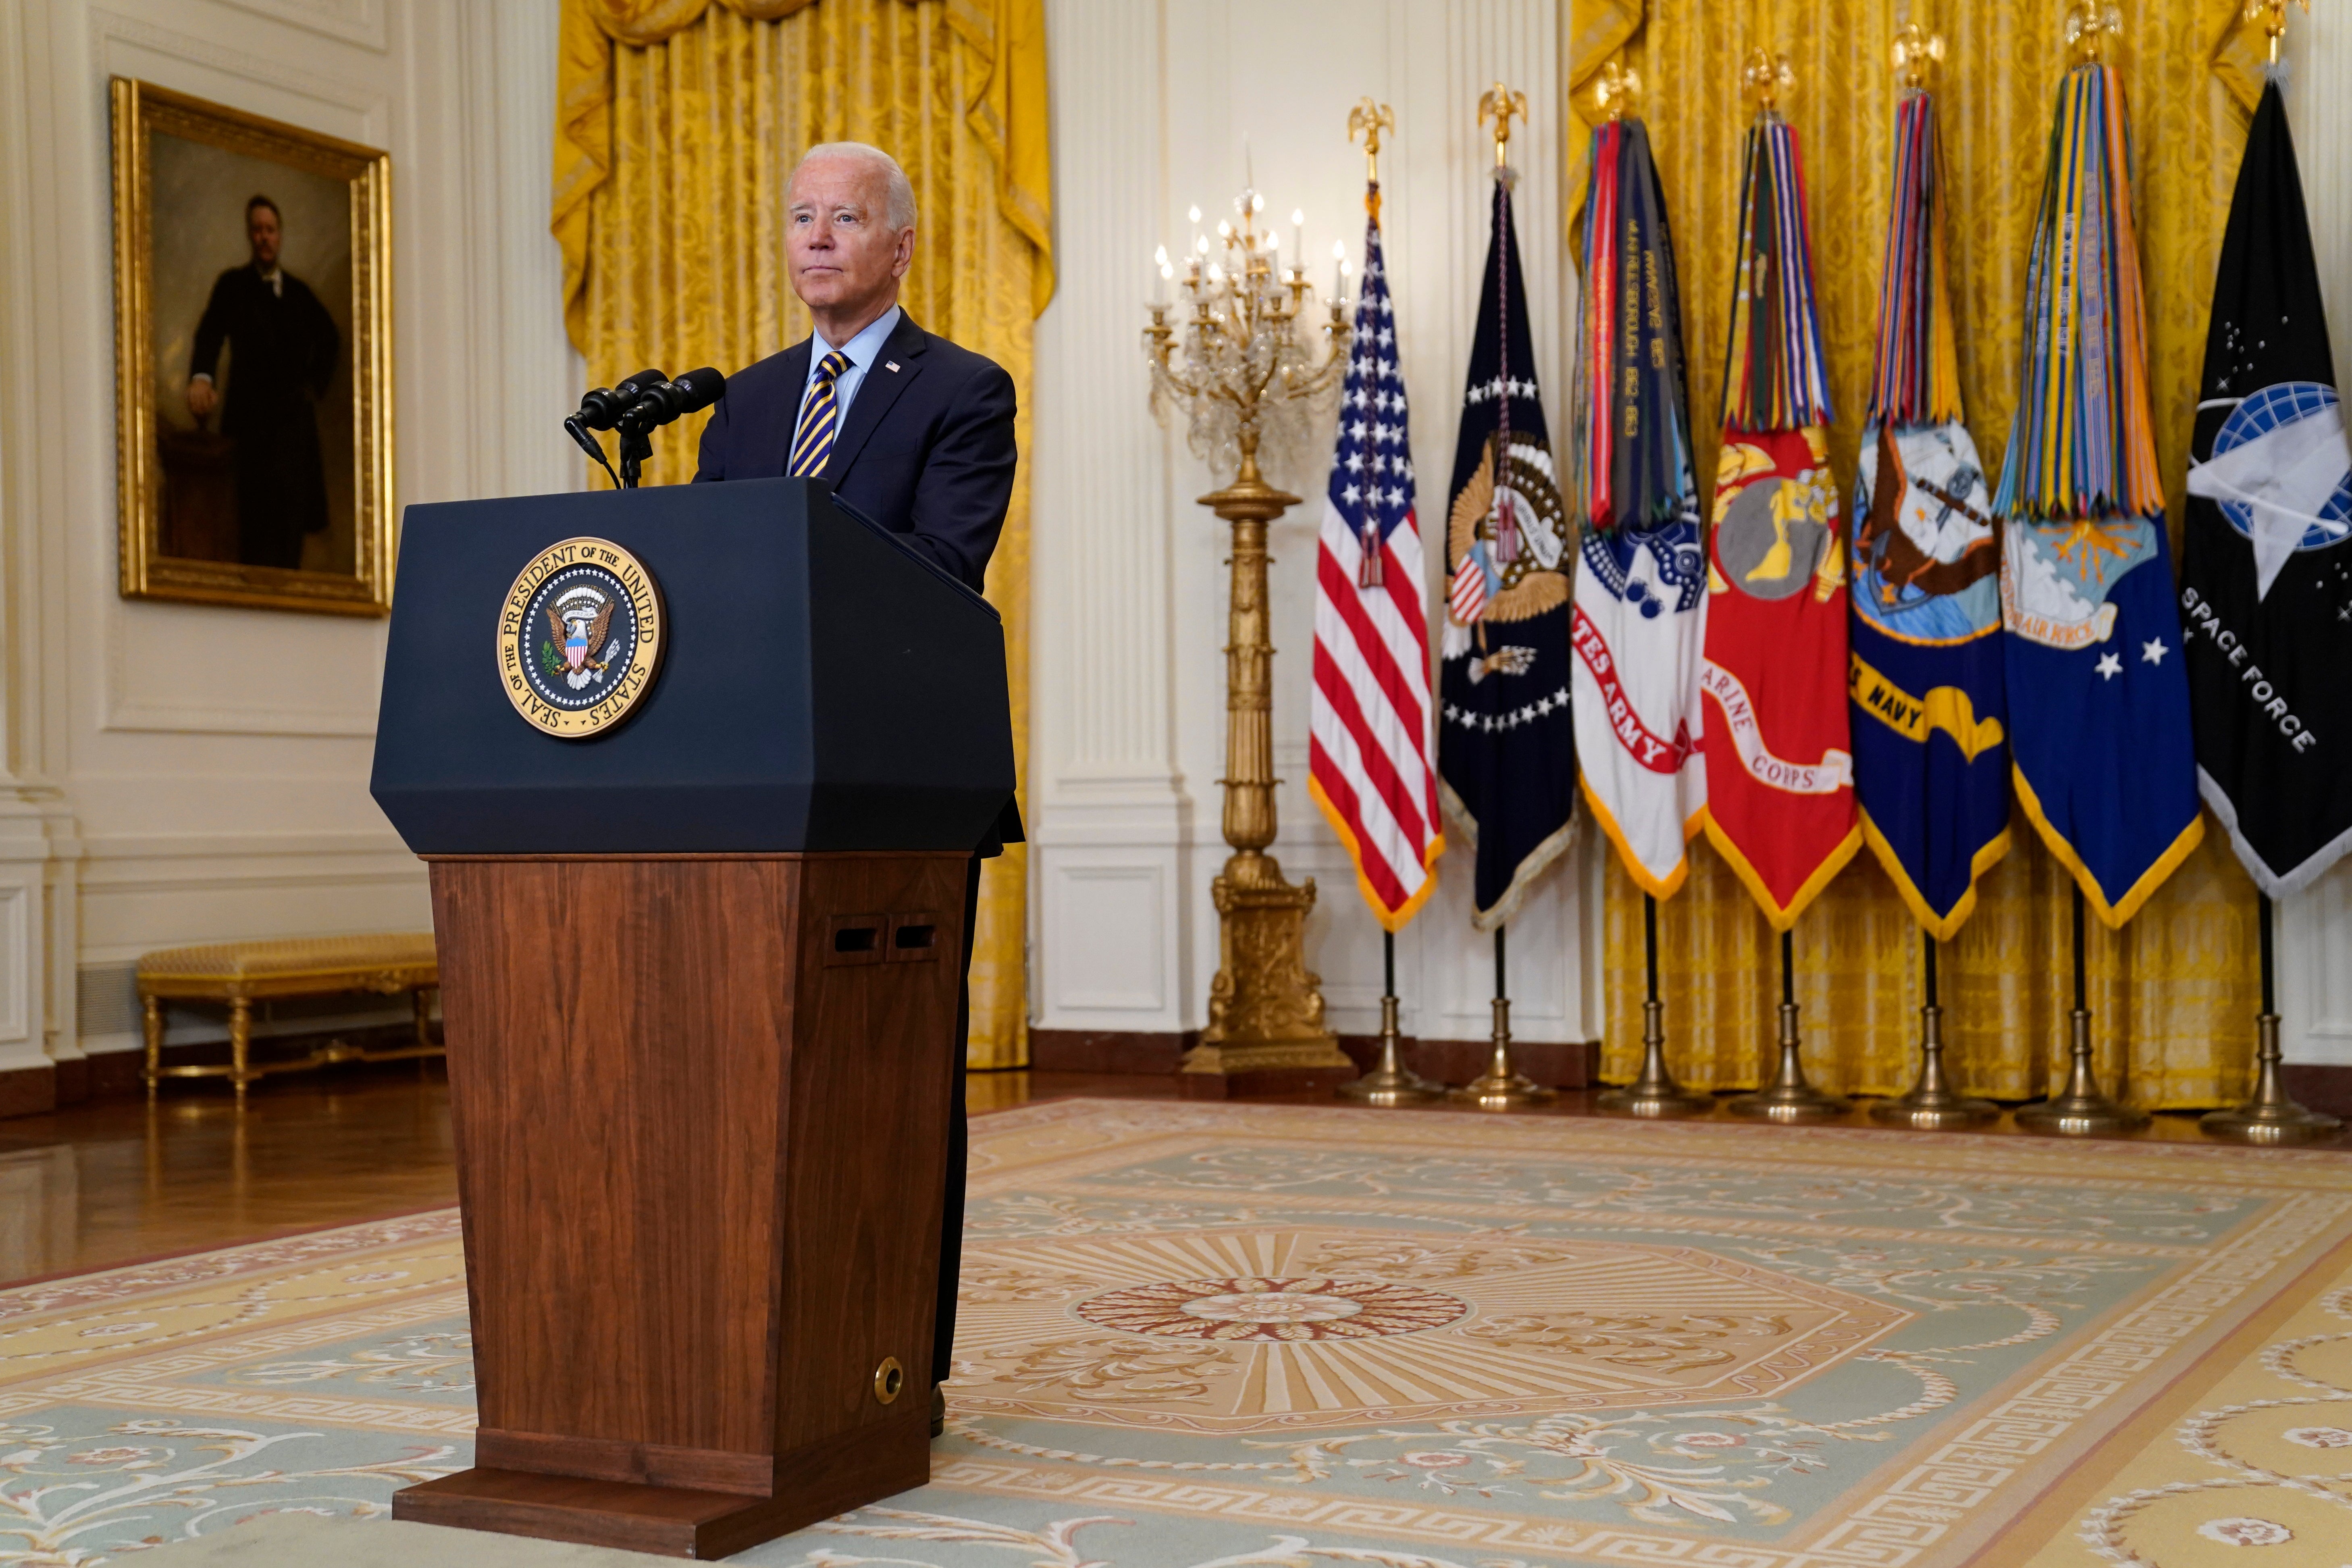 President Joe Biden gives a national address from the White House regarding the US withdrawal from Afghanistan.